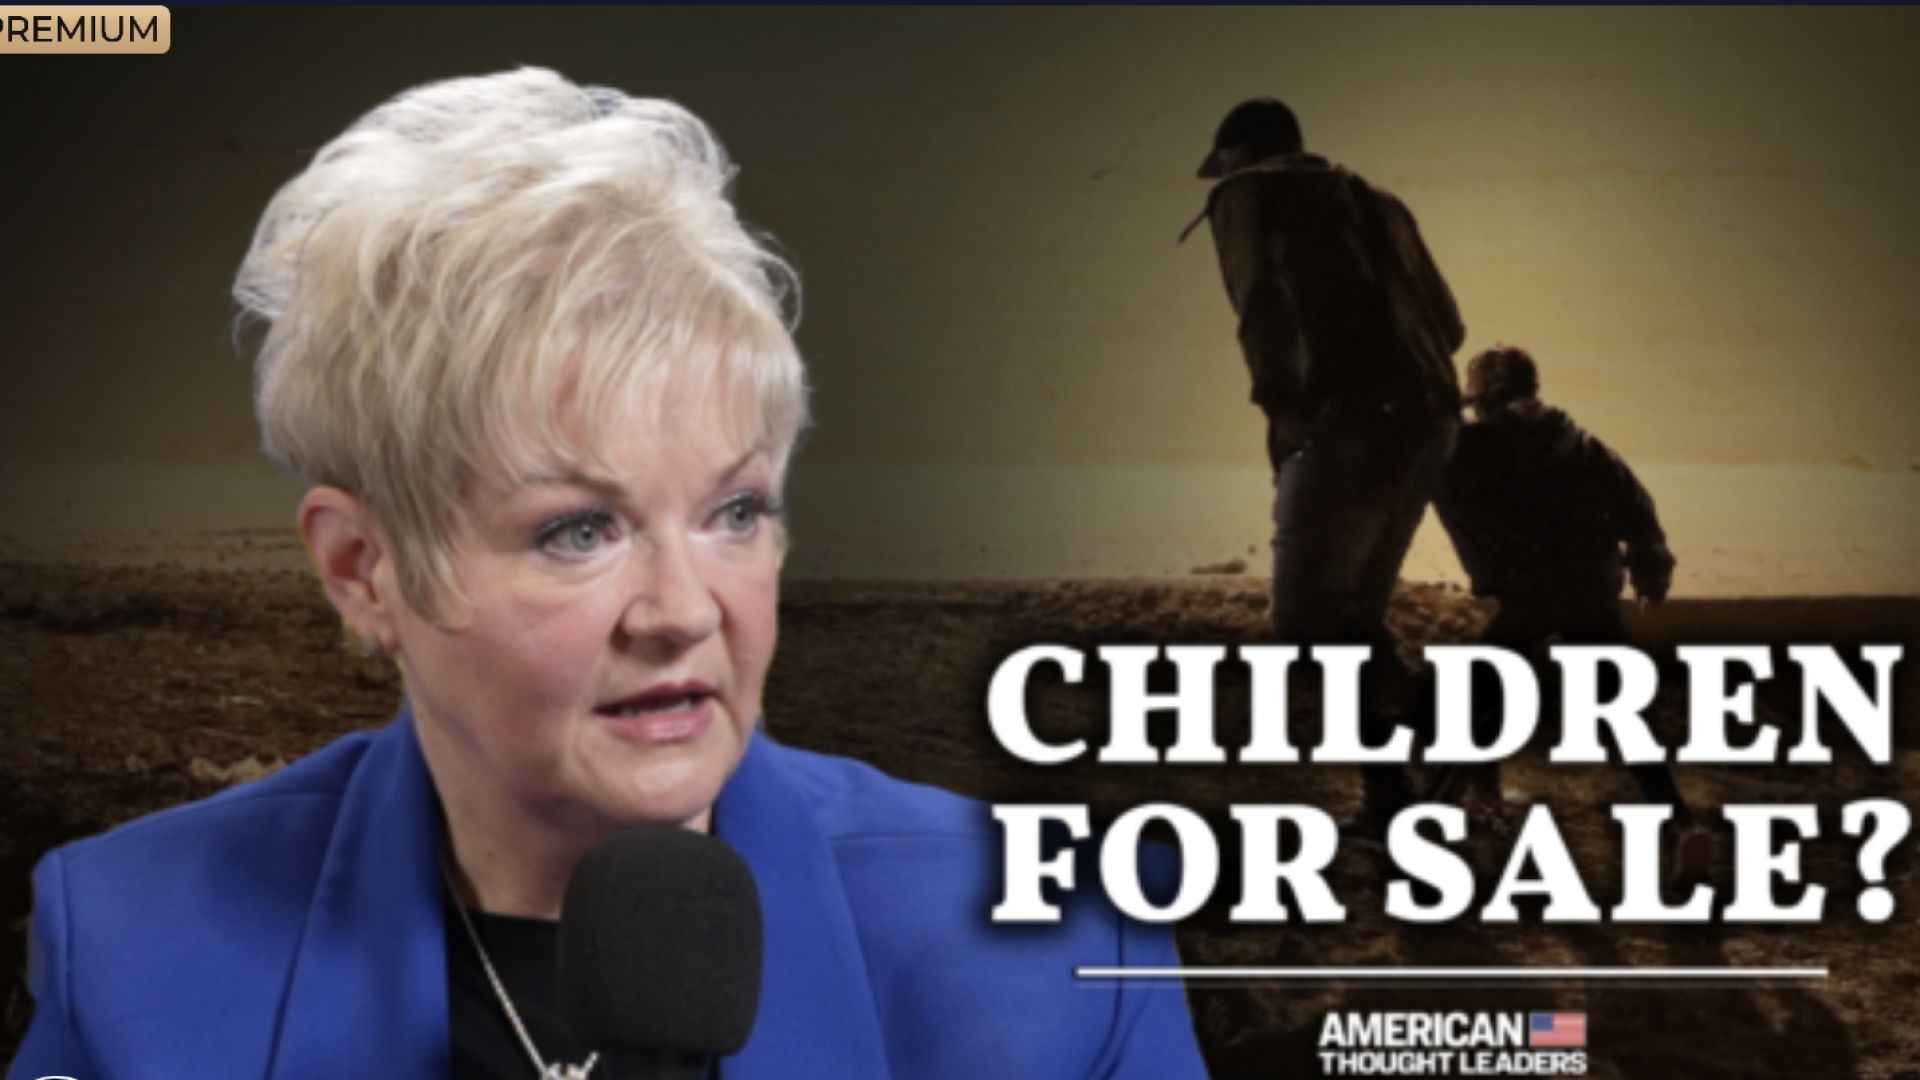 Heading to the American Nightmare. 'Tax payer Funded Child Trafficking' -Wake Up USA!